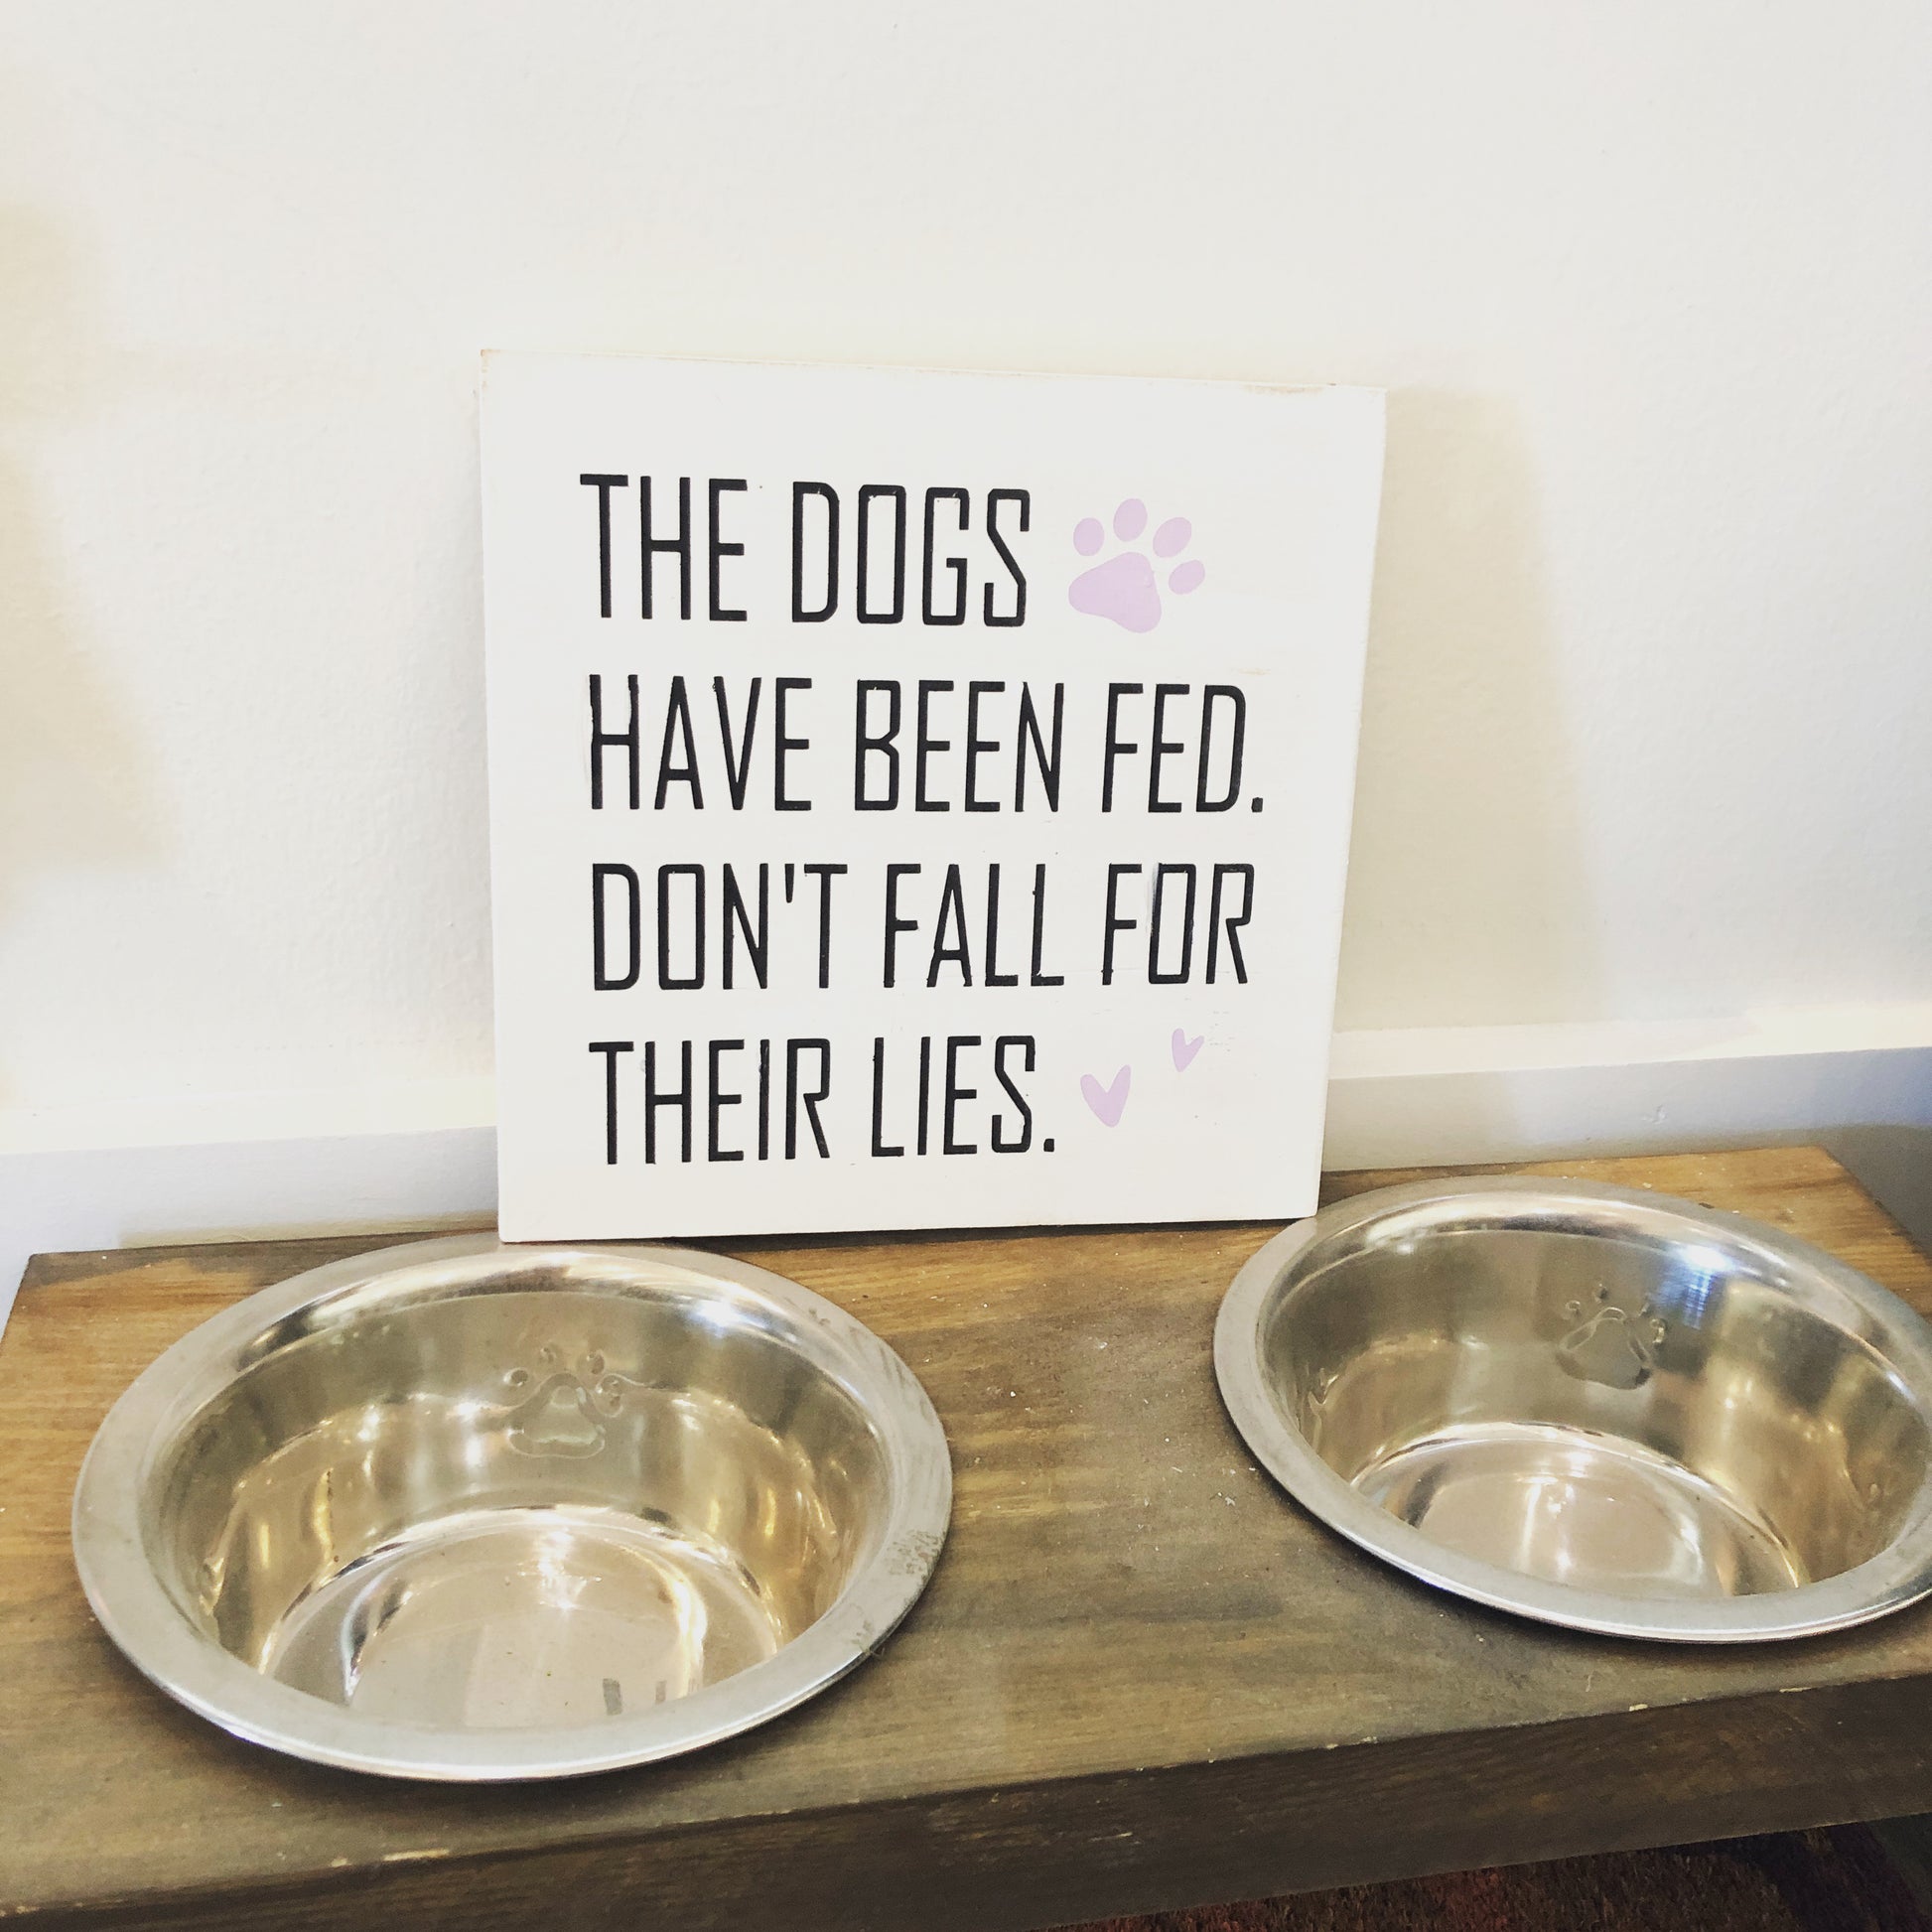 THE DOGS HAVE BEEN FED: MINI Design - Paisley Grace Makery